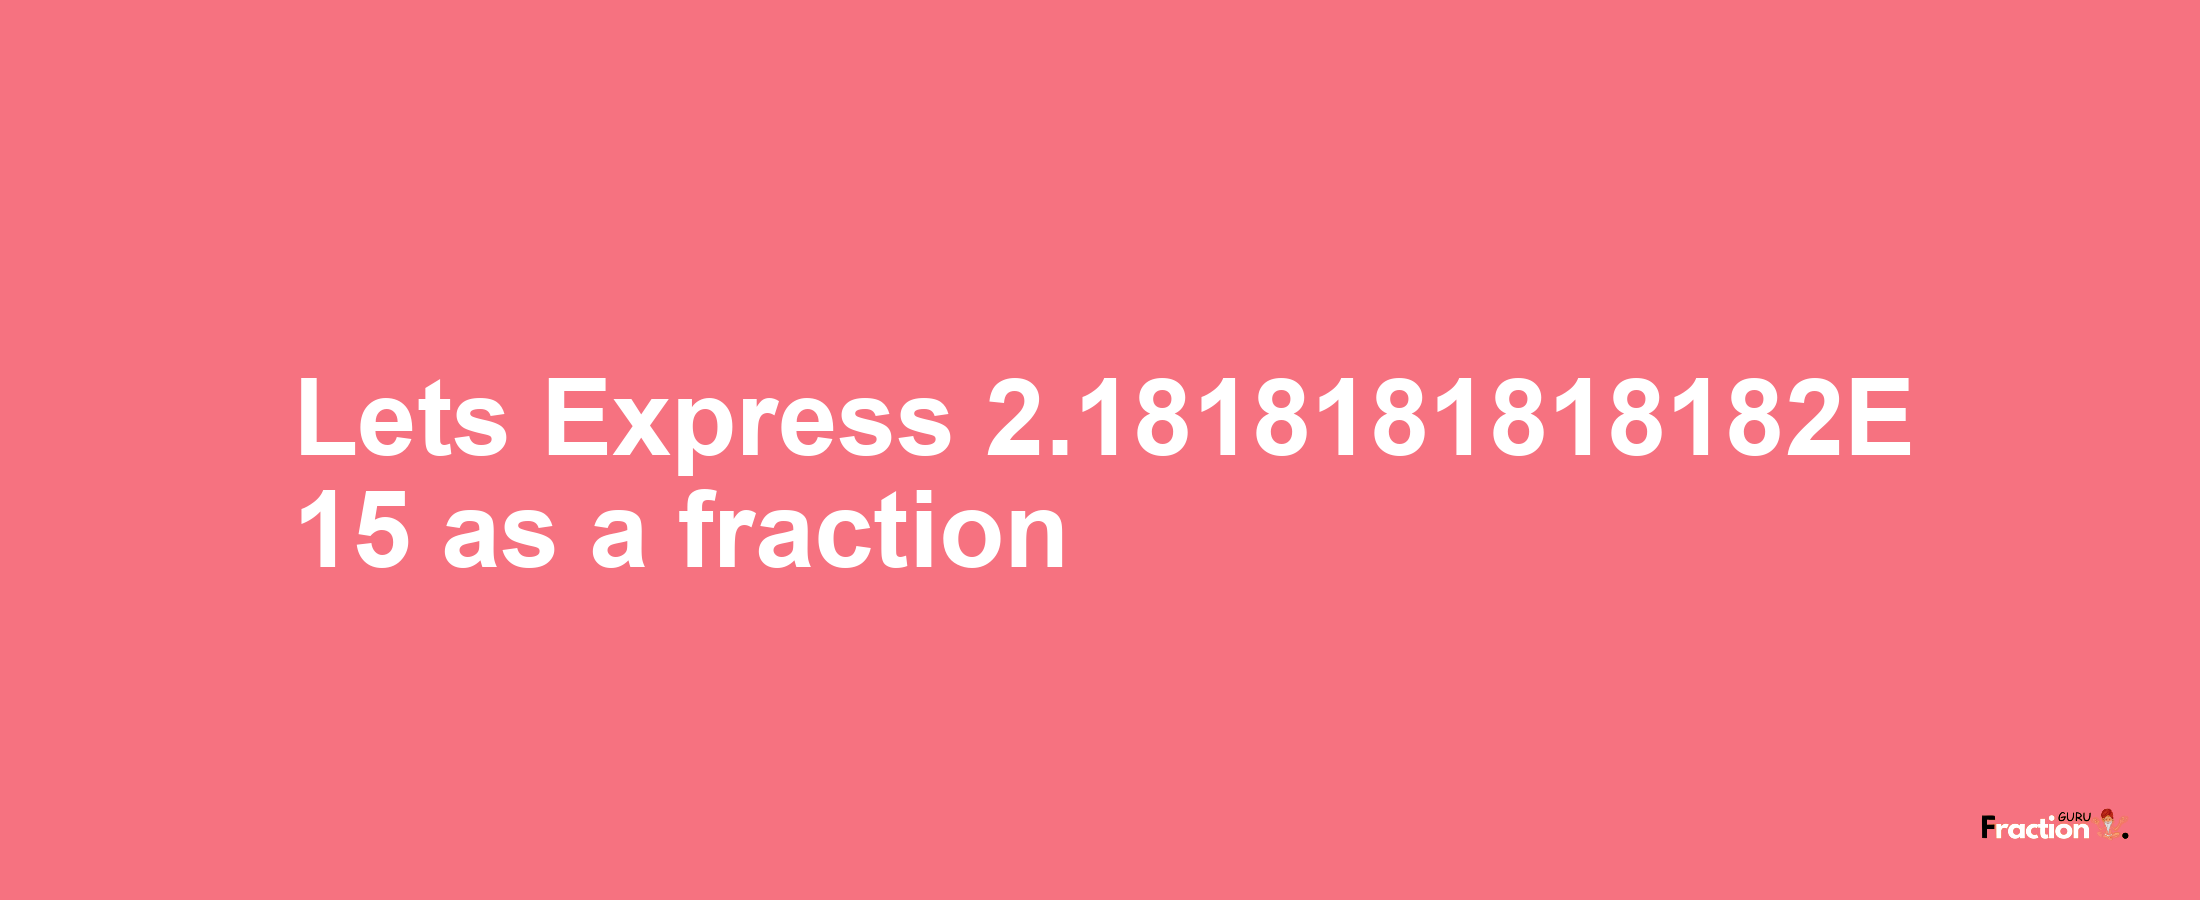 Lets Express 2.1818181818182E 15 as afraction